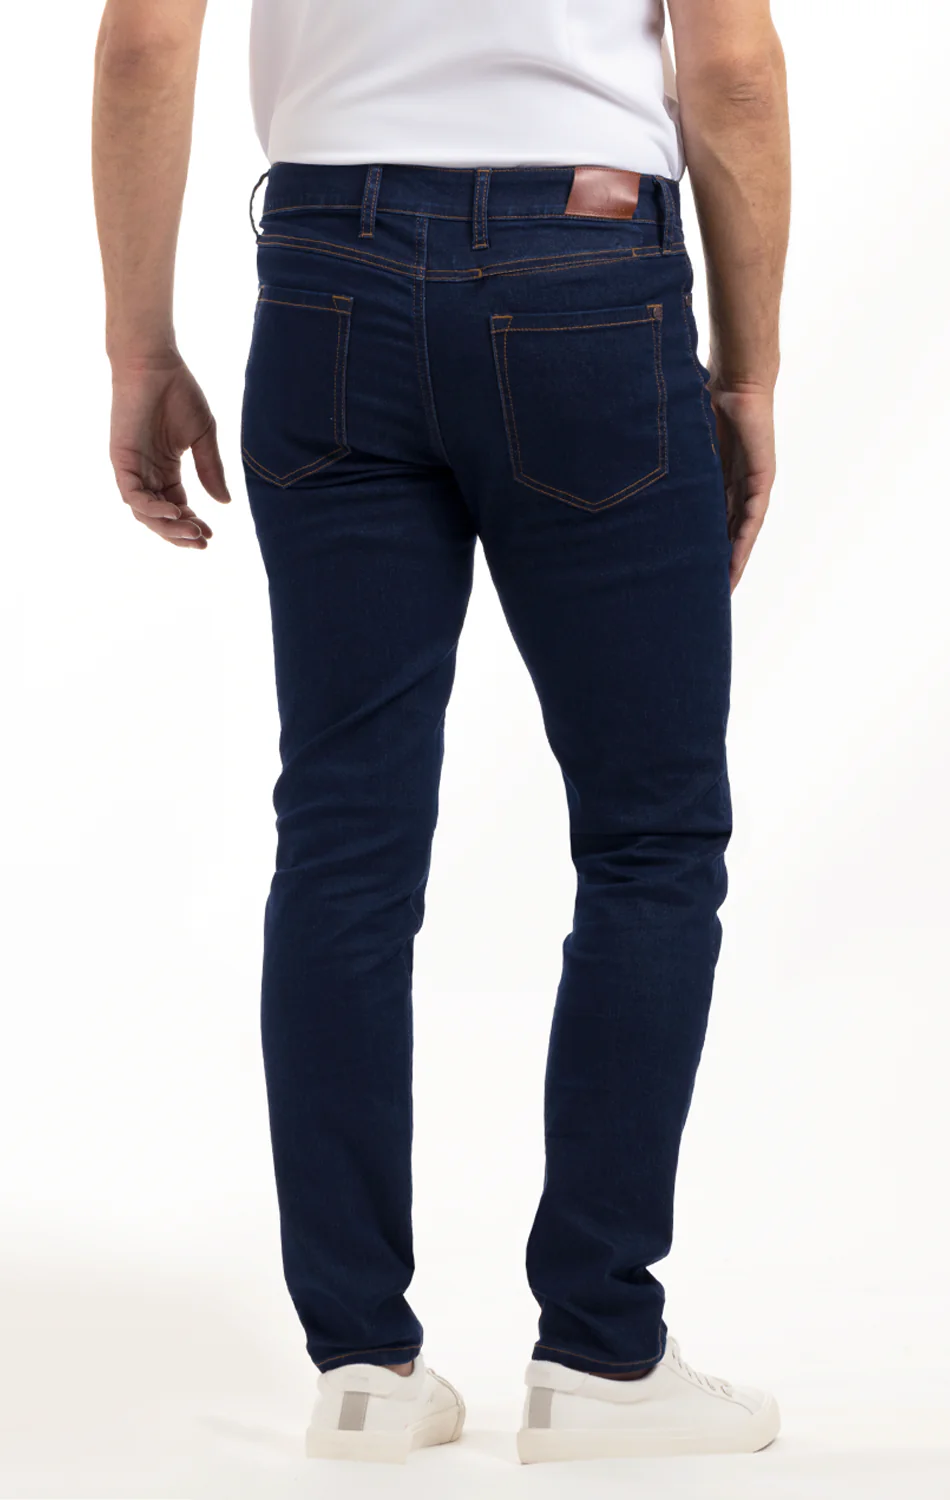 Twillory Performance Jeans